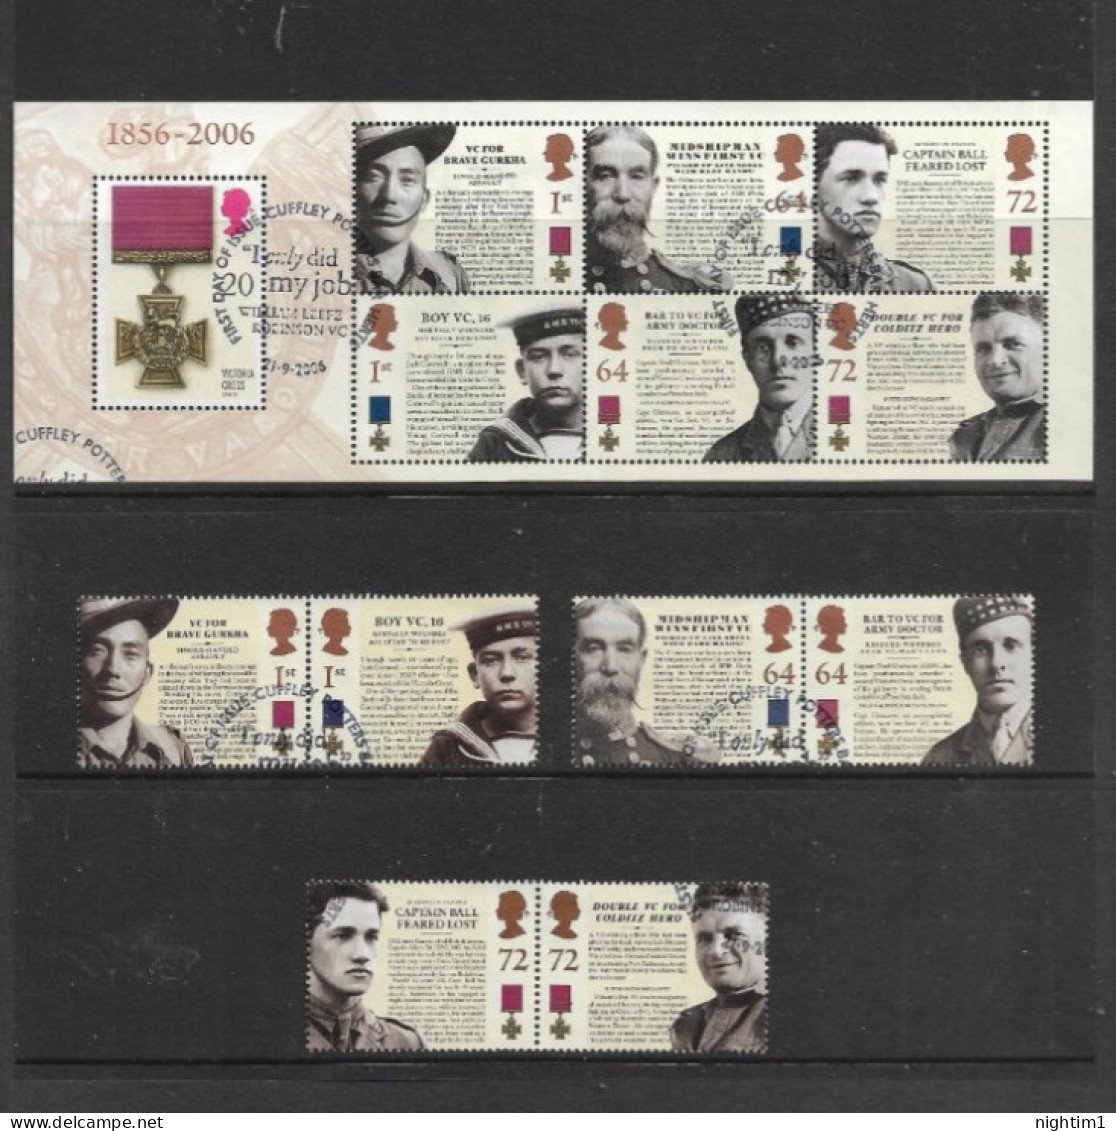 GREAT BRITAIN COLLECTION. VICTORIA CROSS SET OF 6 AND SOUVENIR SHEET. USED. - Oblitérés